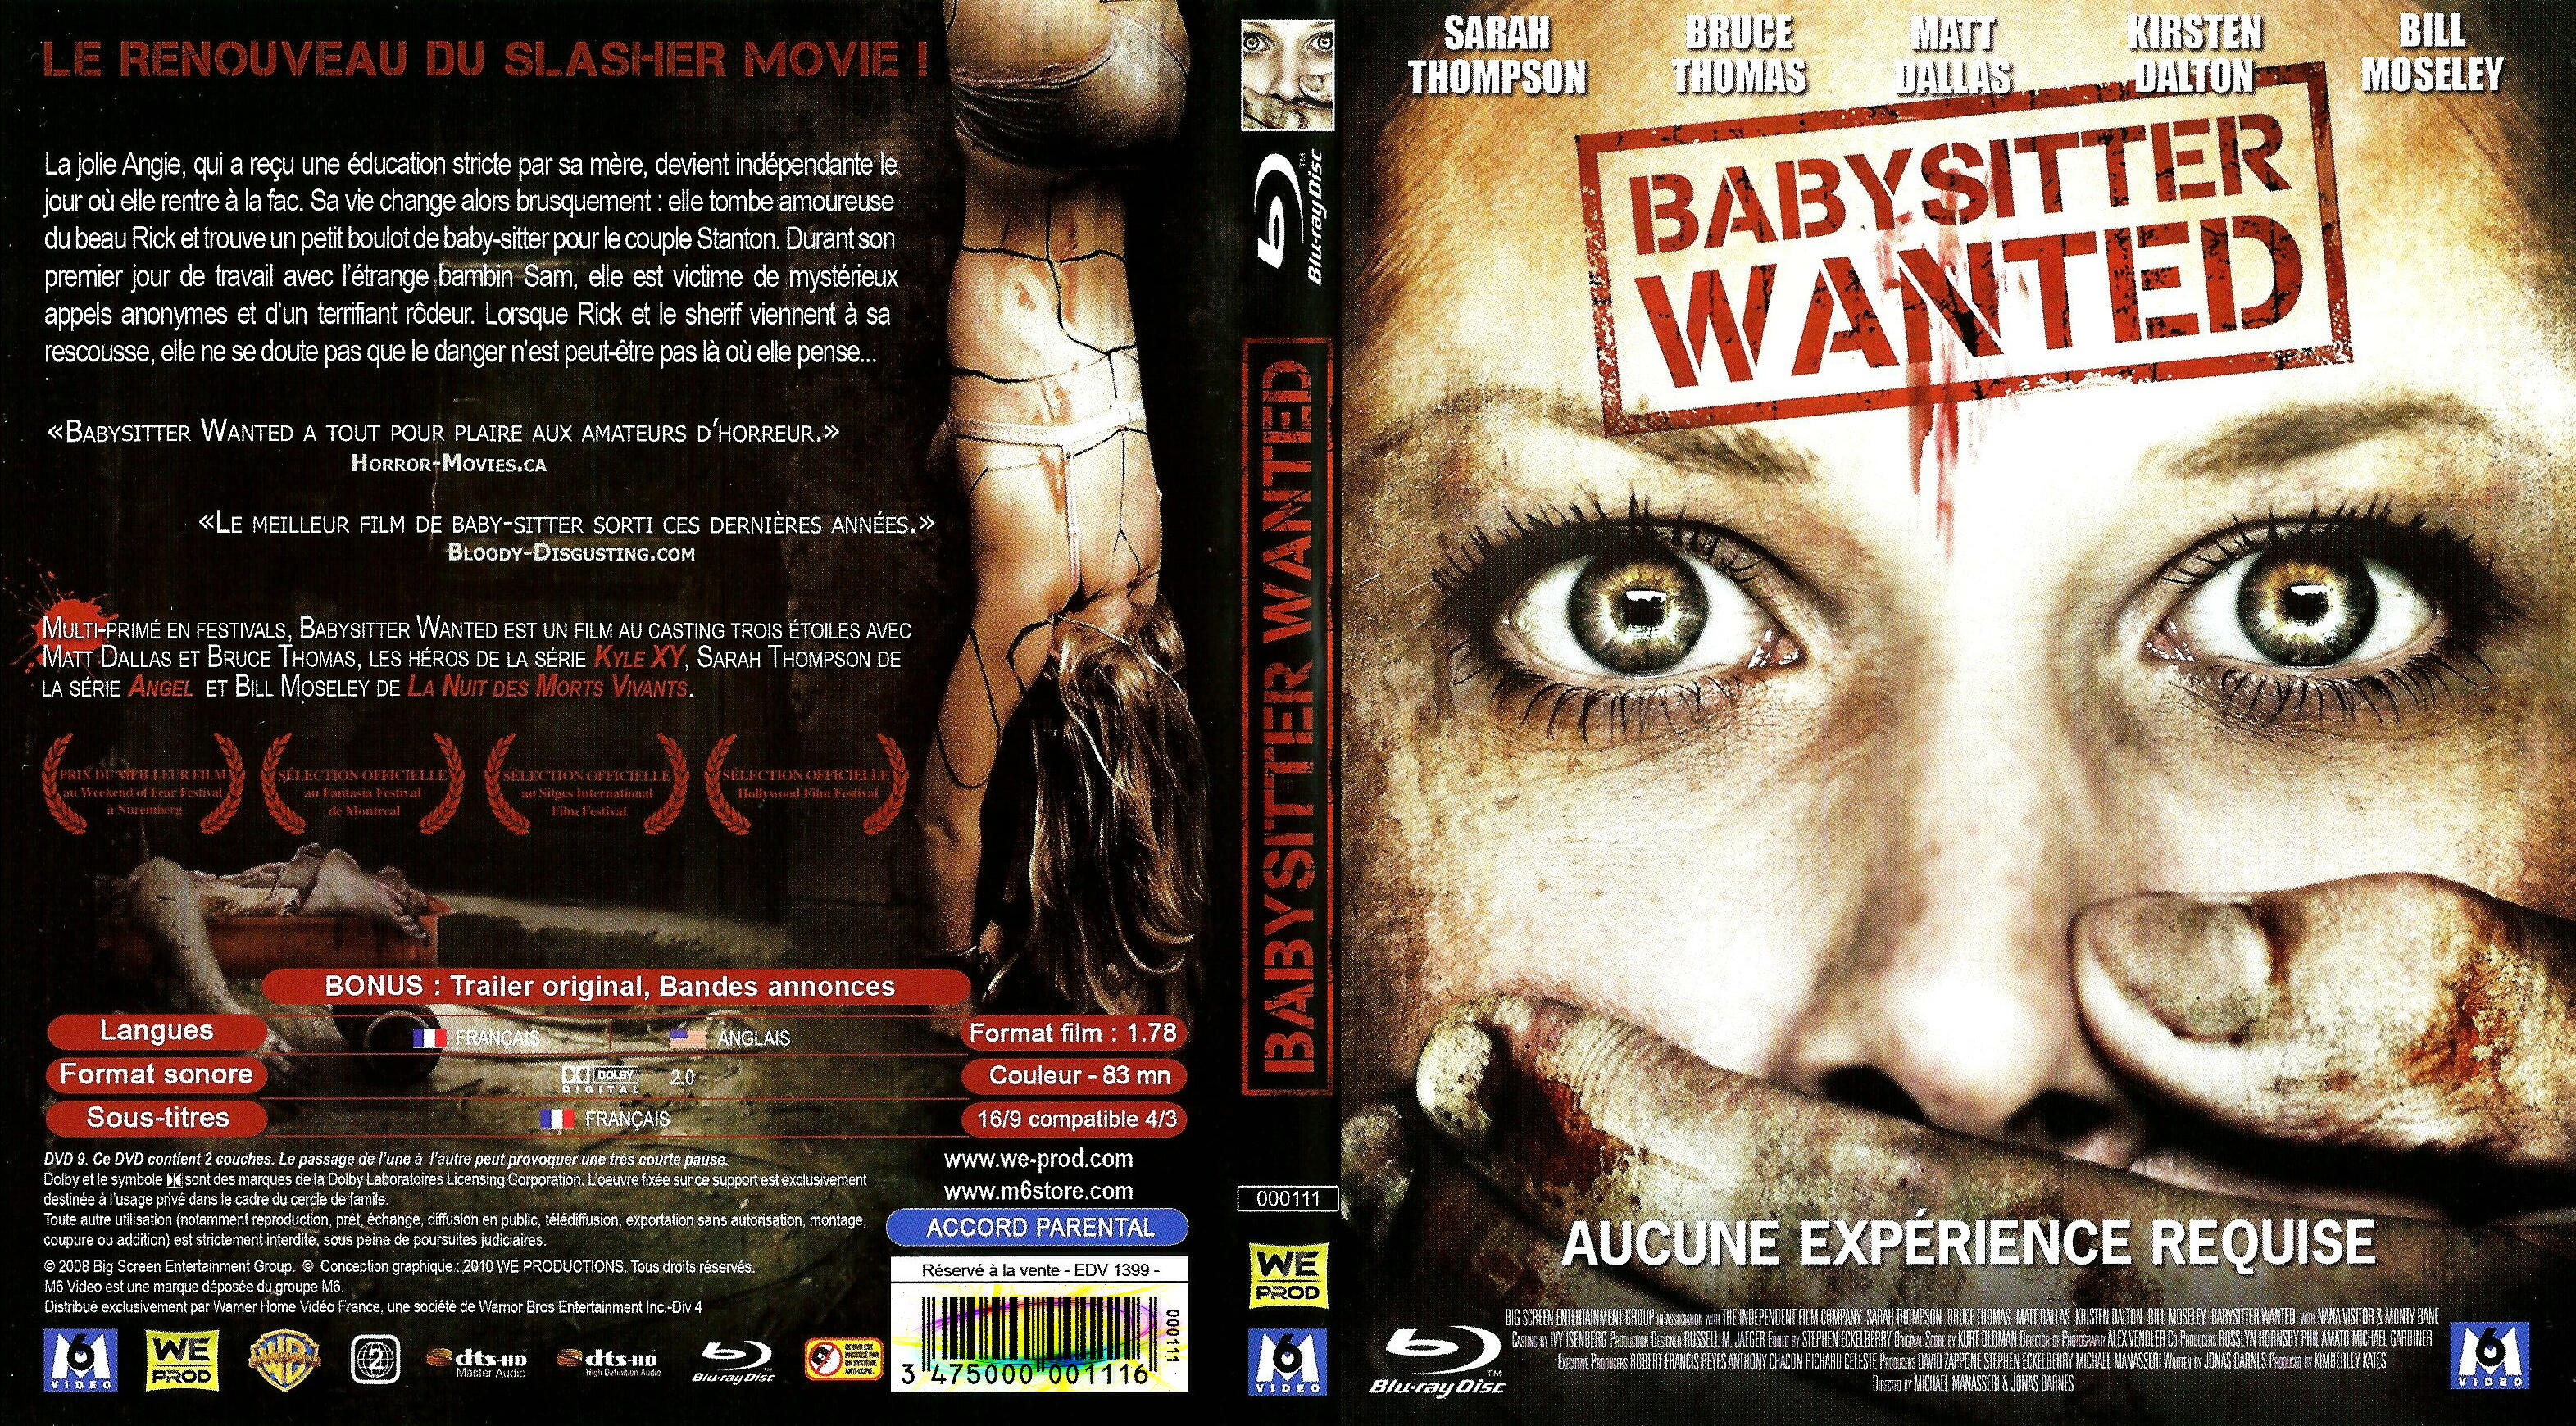 Jaquette DVD Babysitter wanted (BLU-RAY)